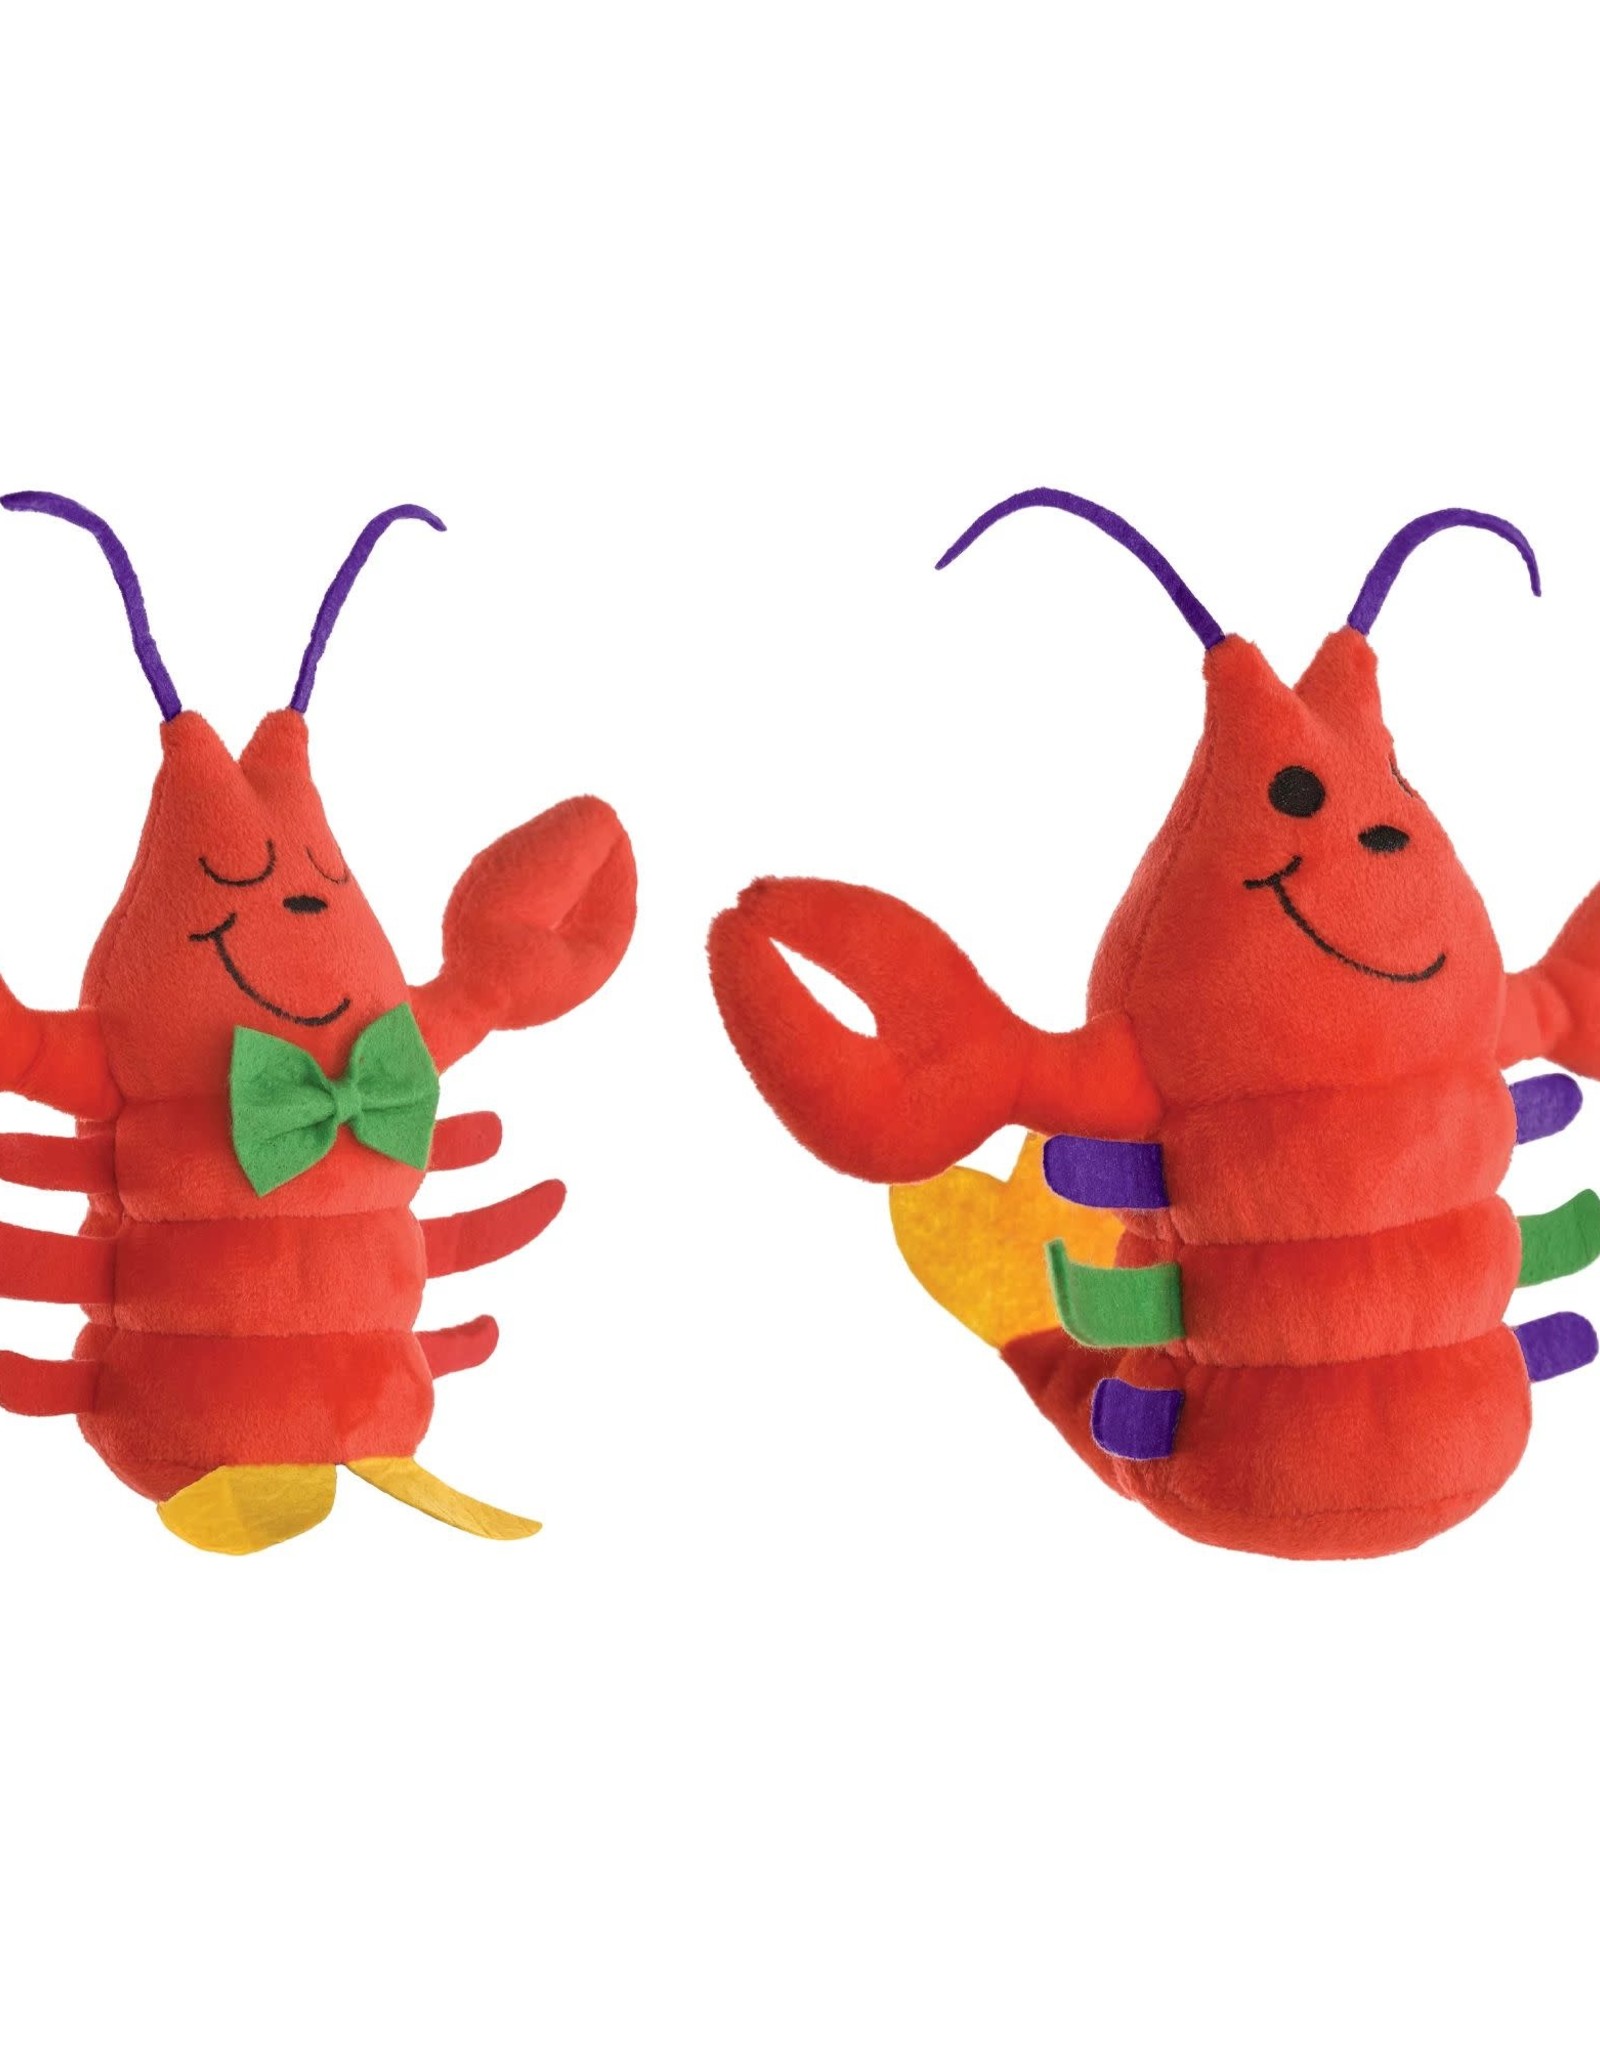 Roly Poly Character Assortment - Crawfish